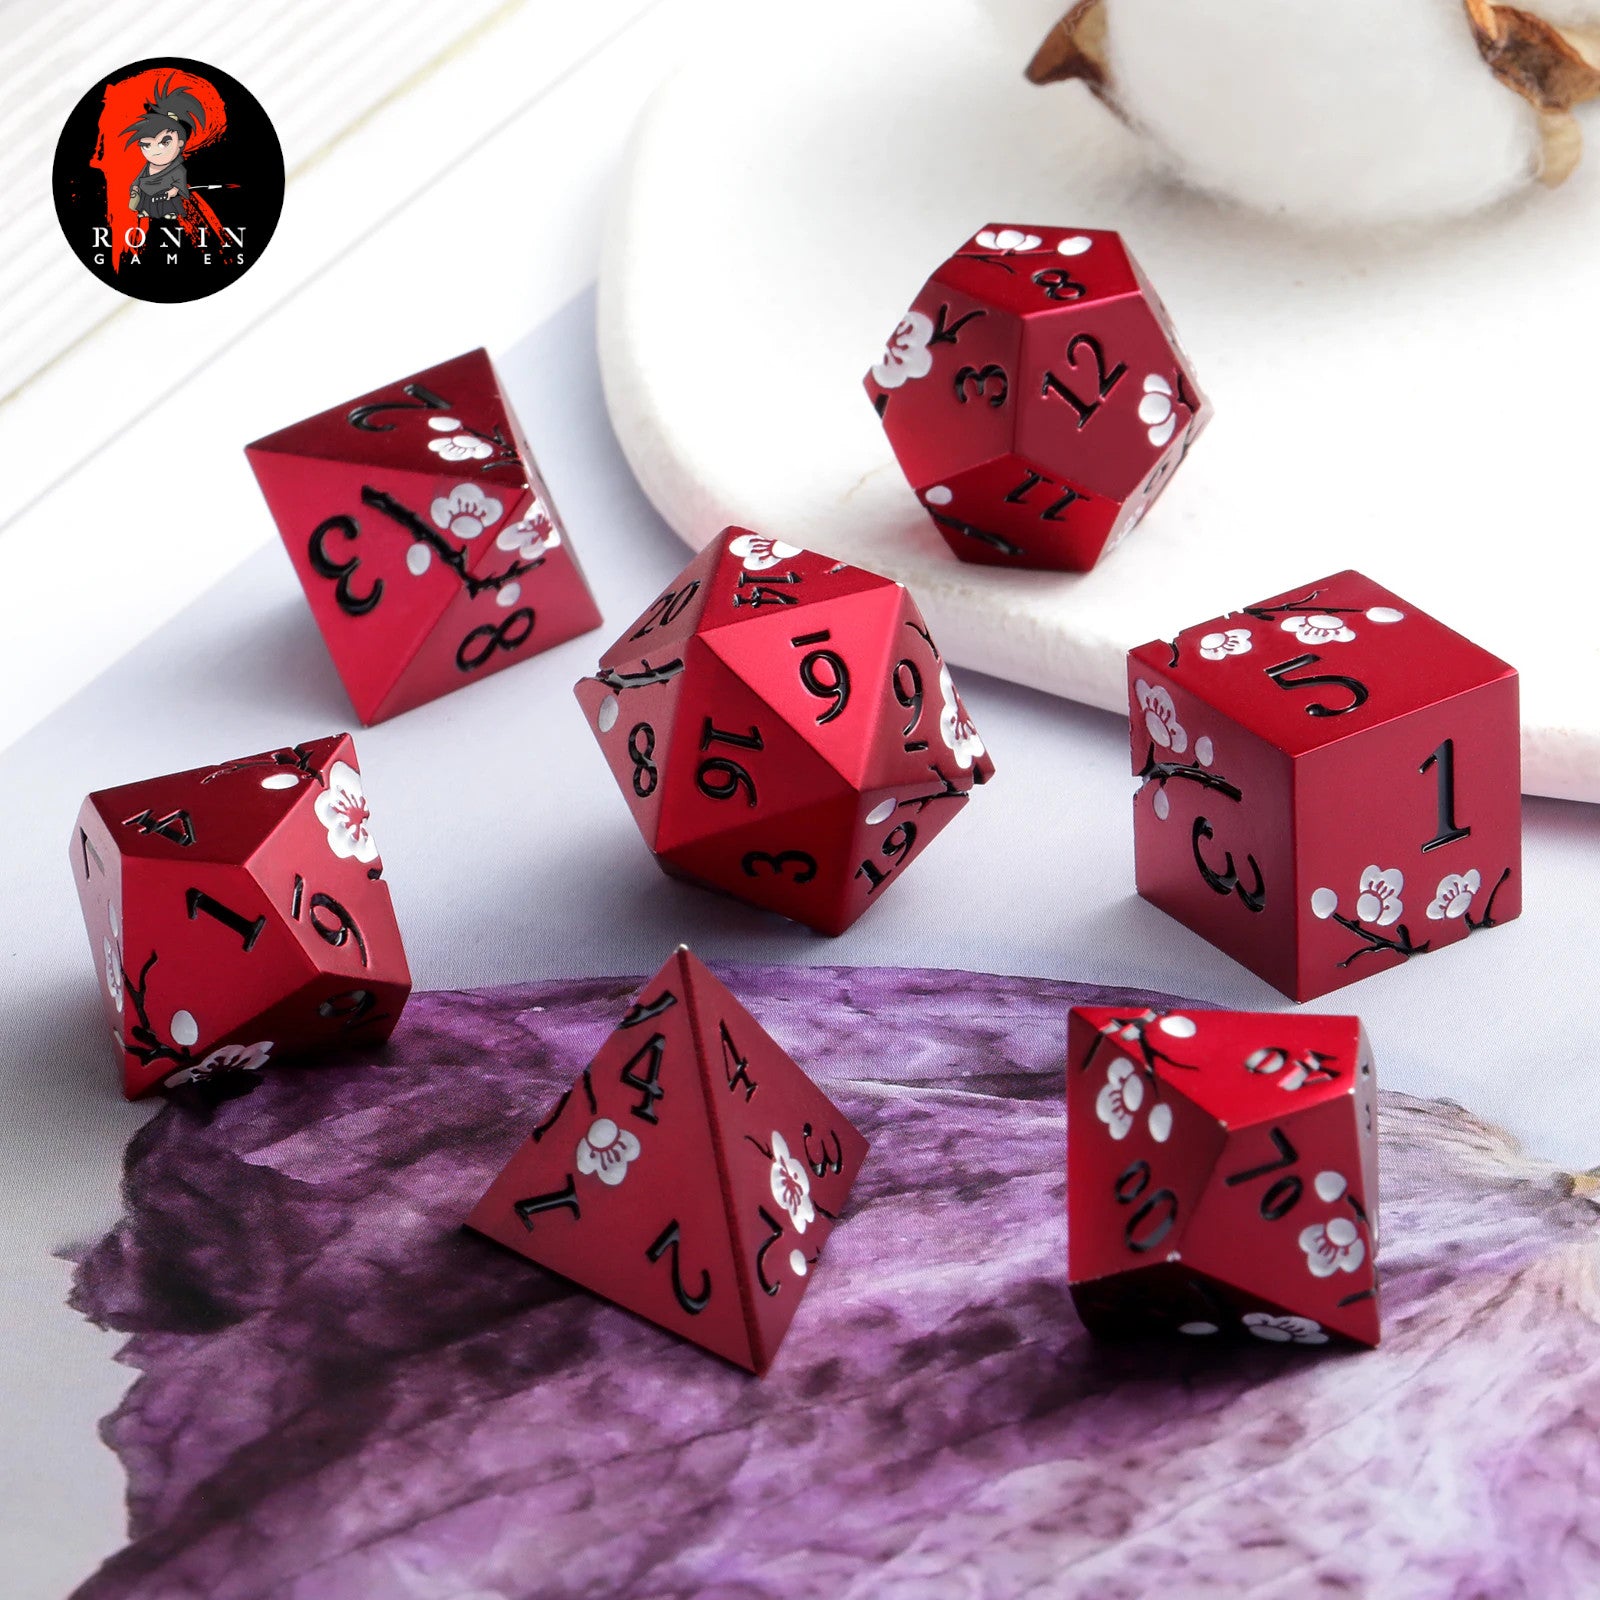 Metal Japanese Cherry Blossom Red and White 7-Die RPG Set - Ronin Games Dice MP-011